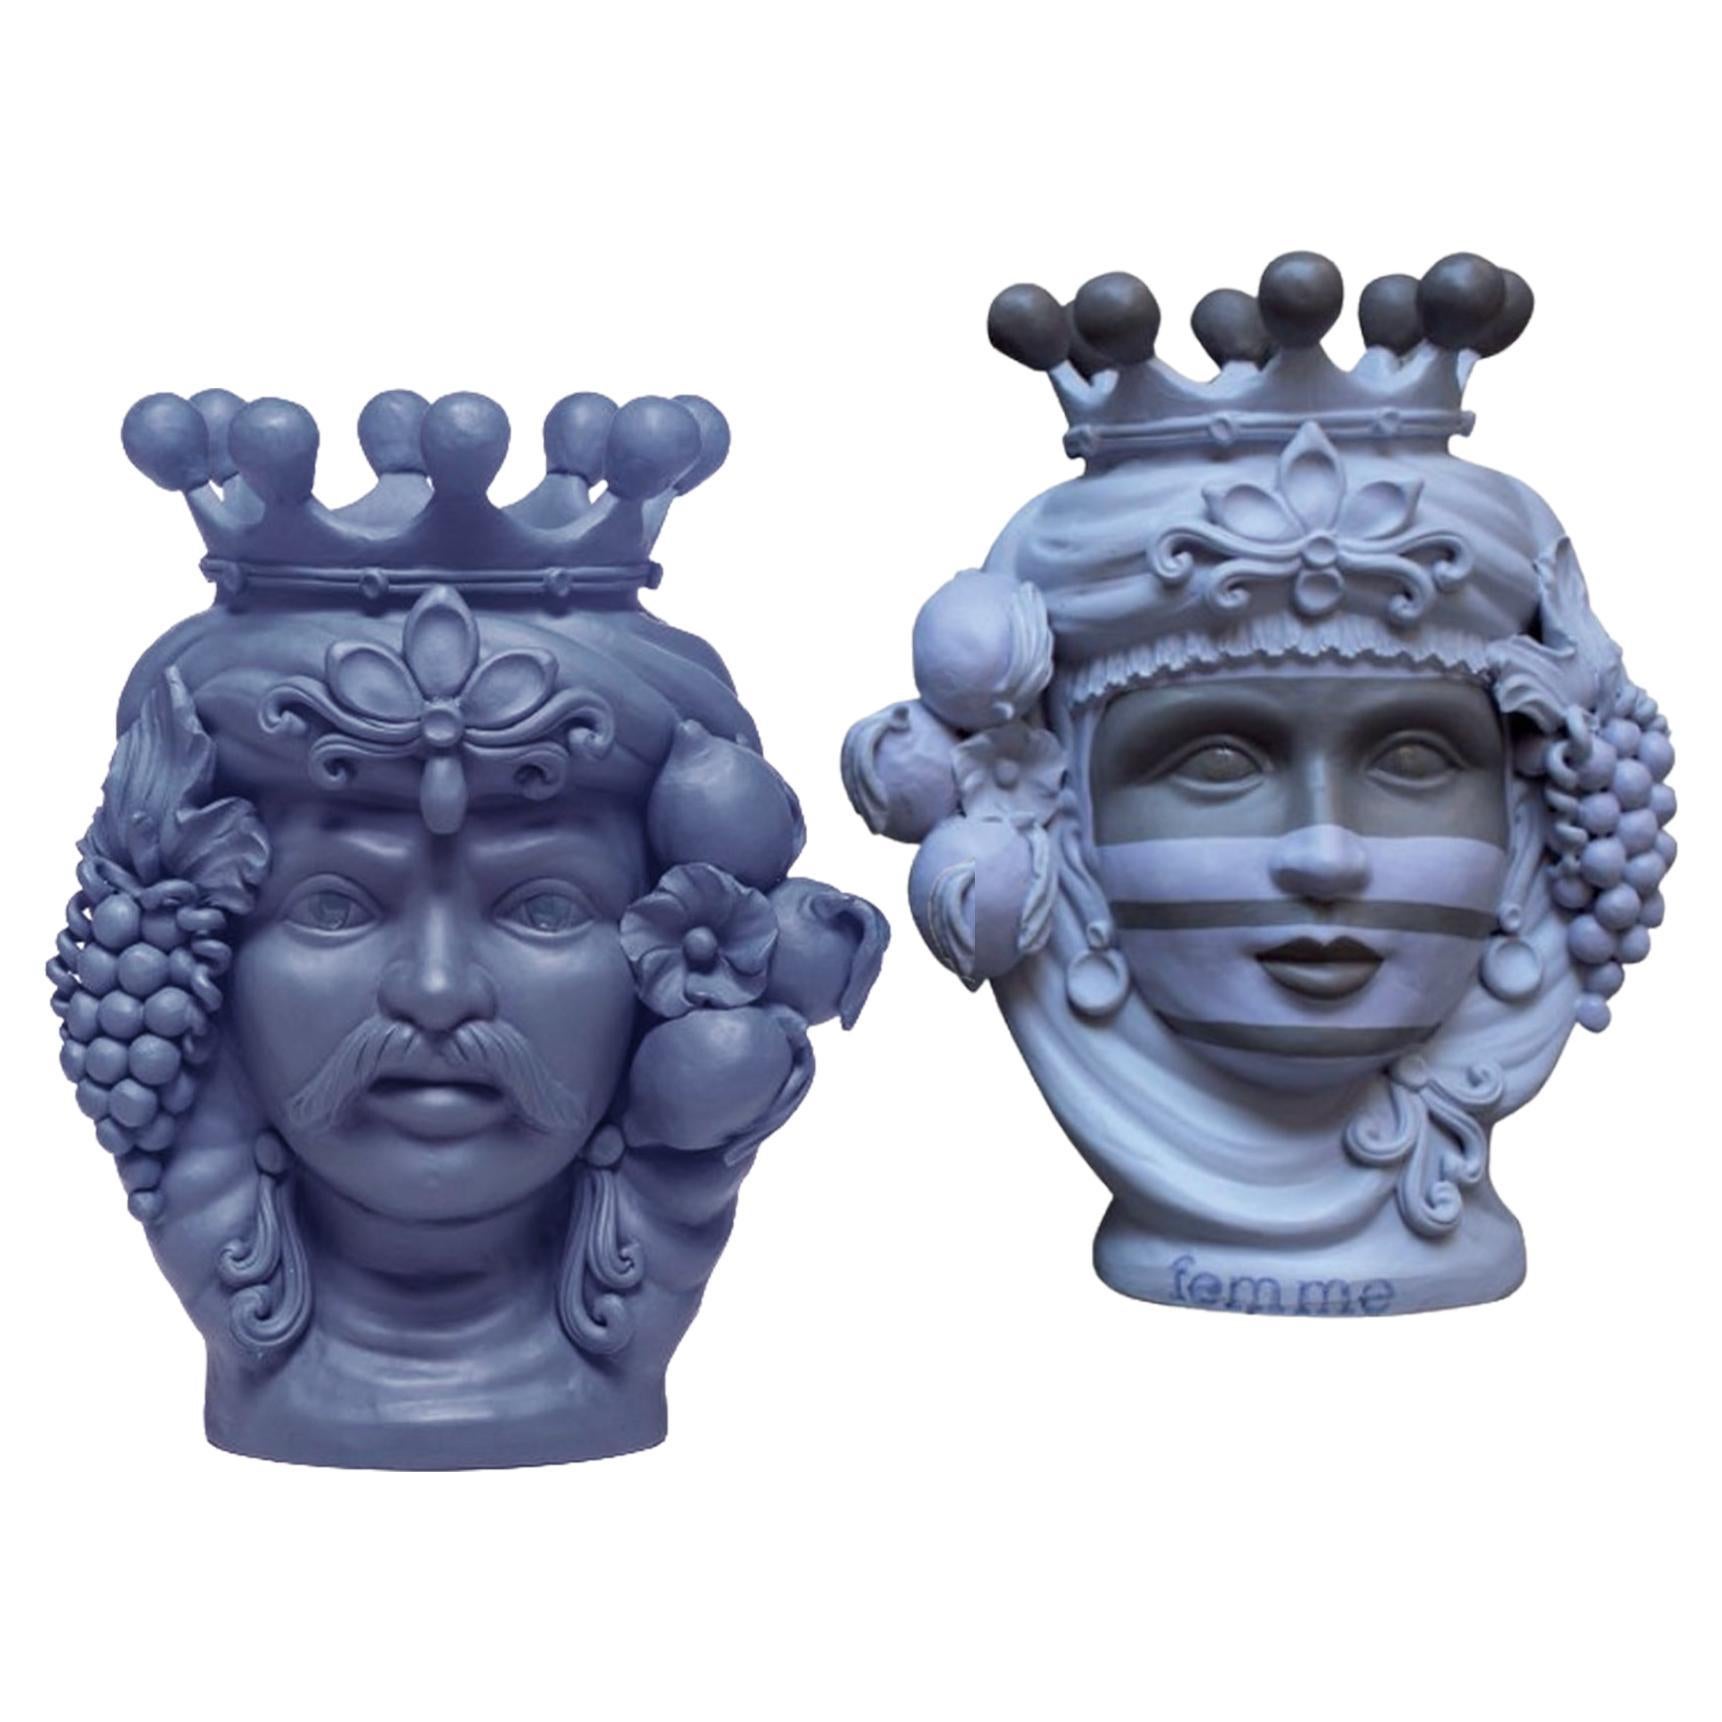 Moorish Heads Vases Collection "Palermo décor", Set of 2, Handmade in Italy For Sale